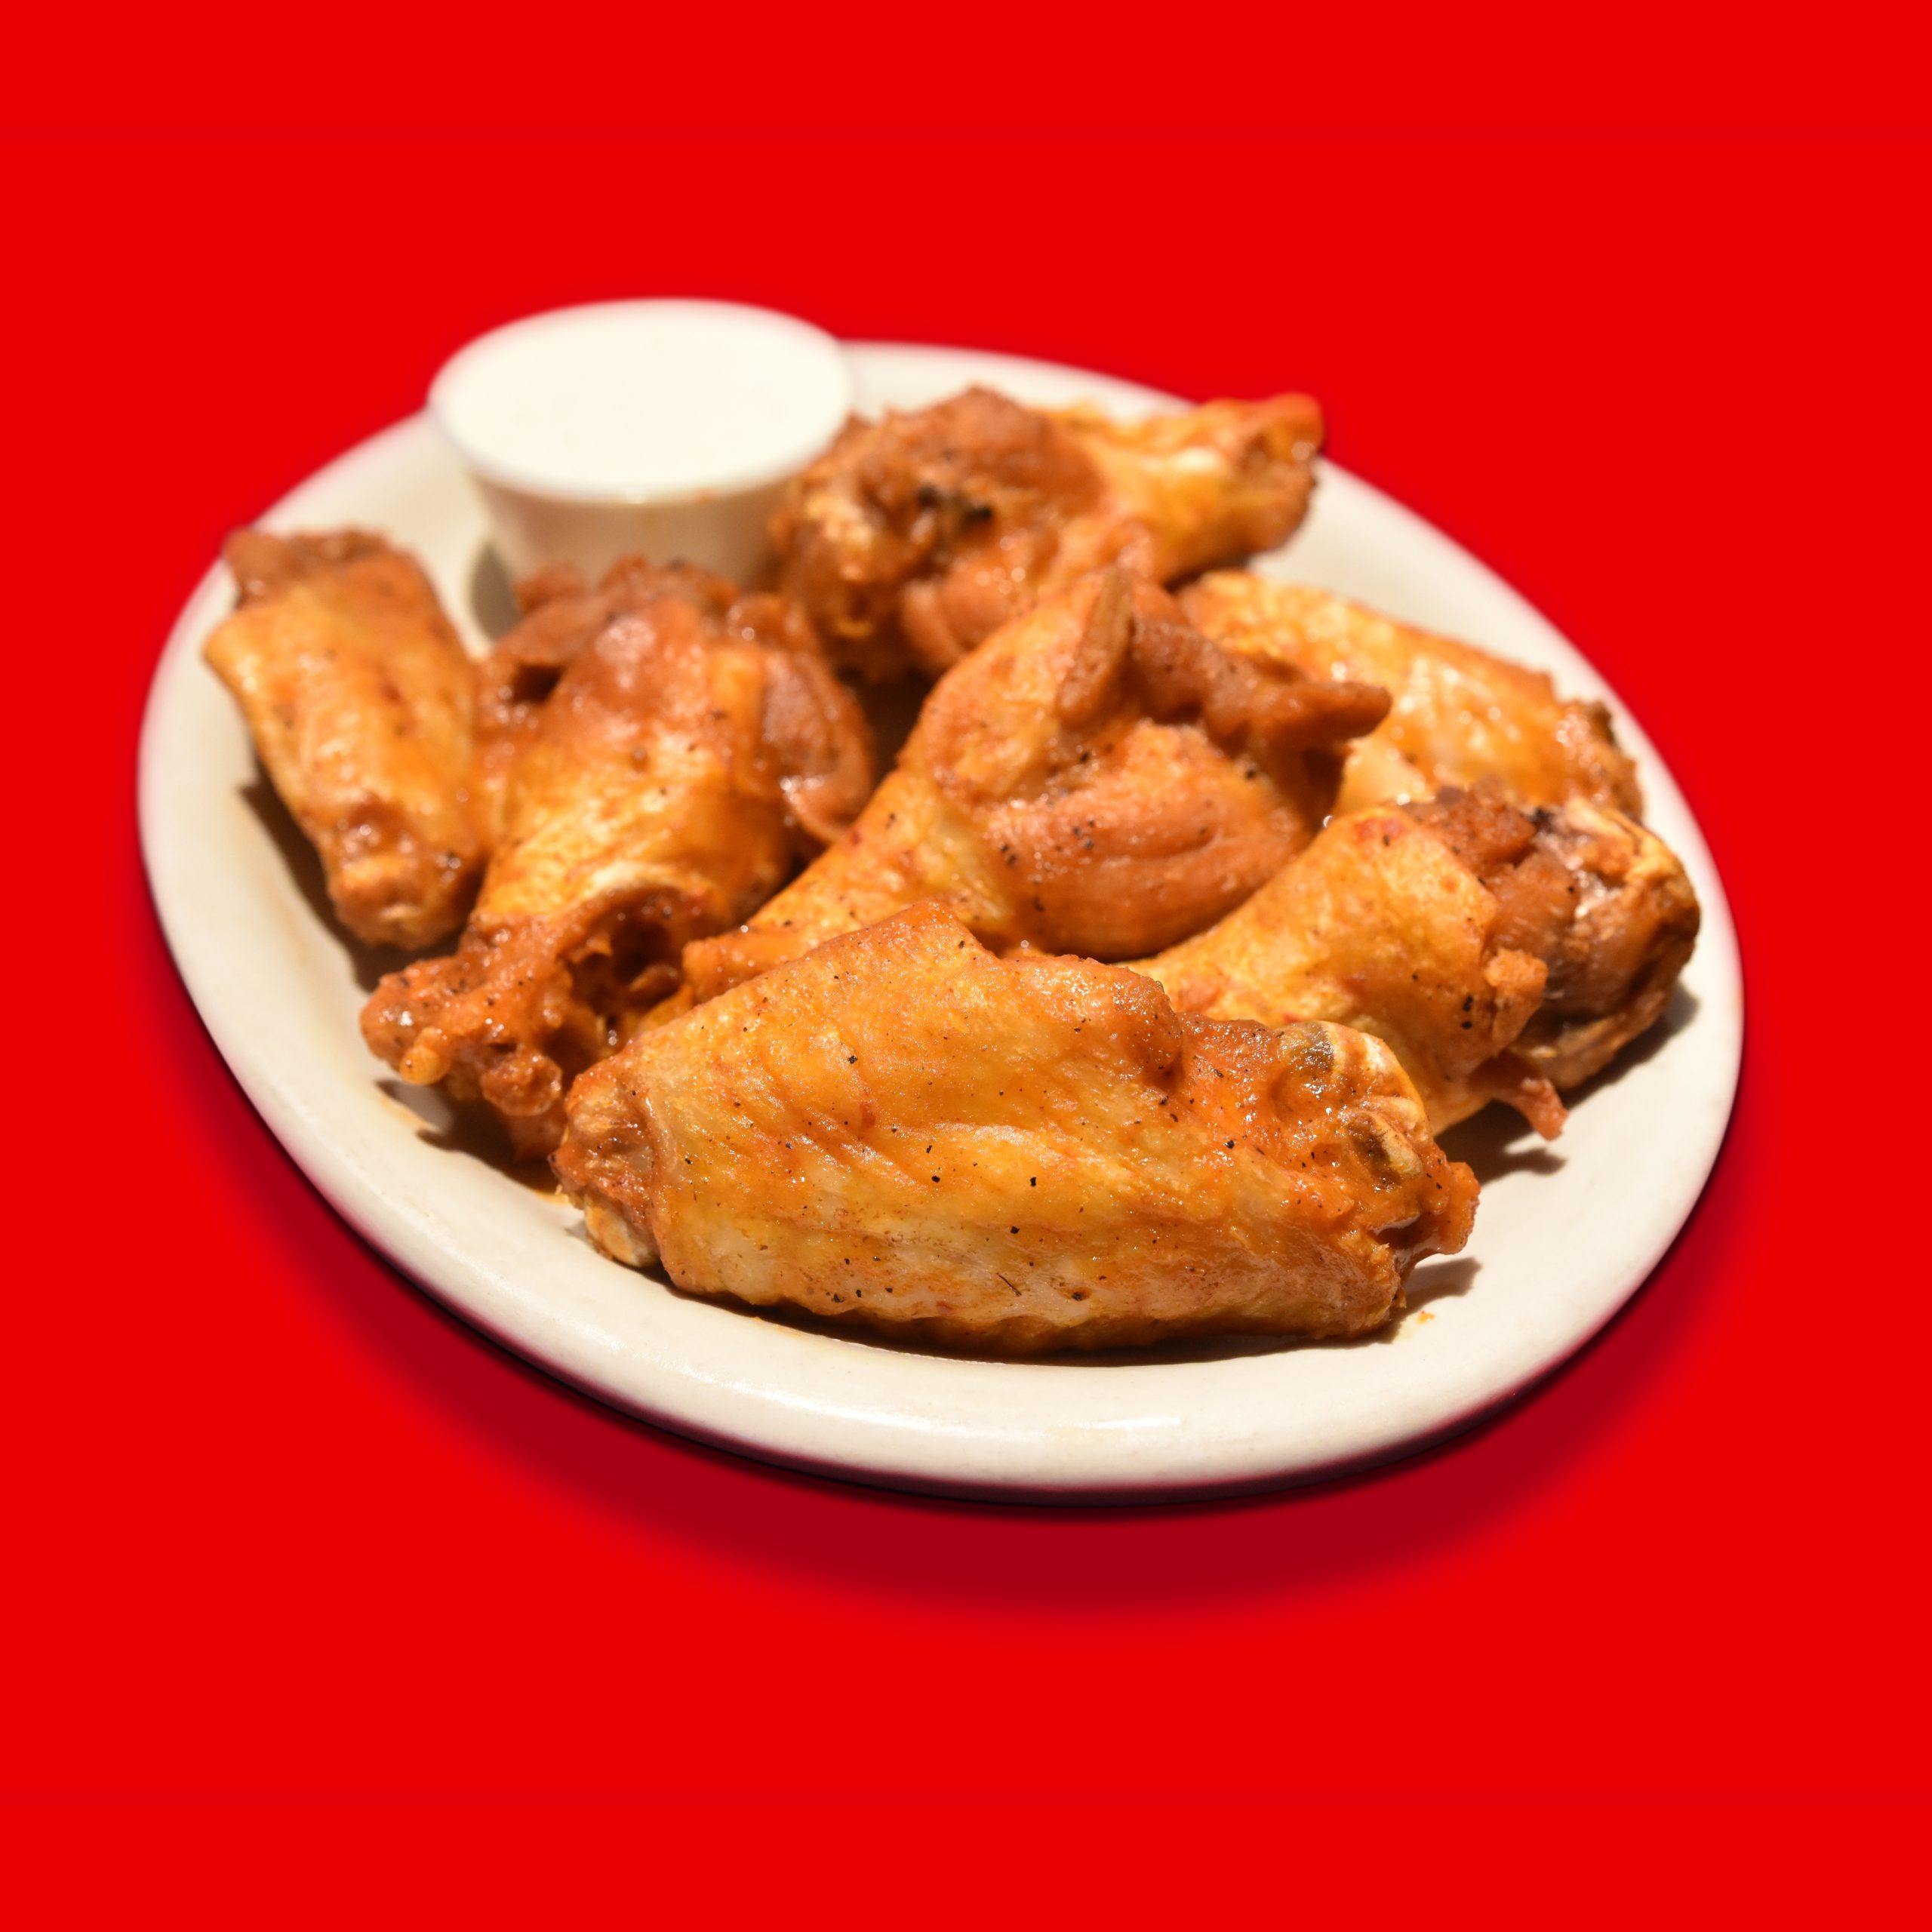 Plate of trashed boneless wings over red background